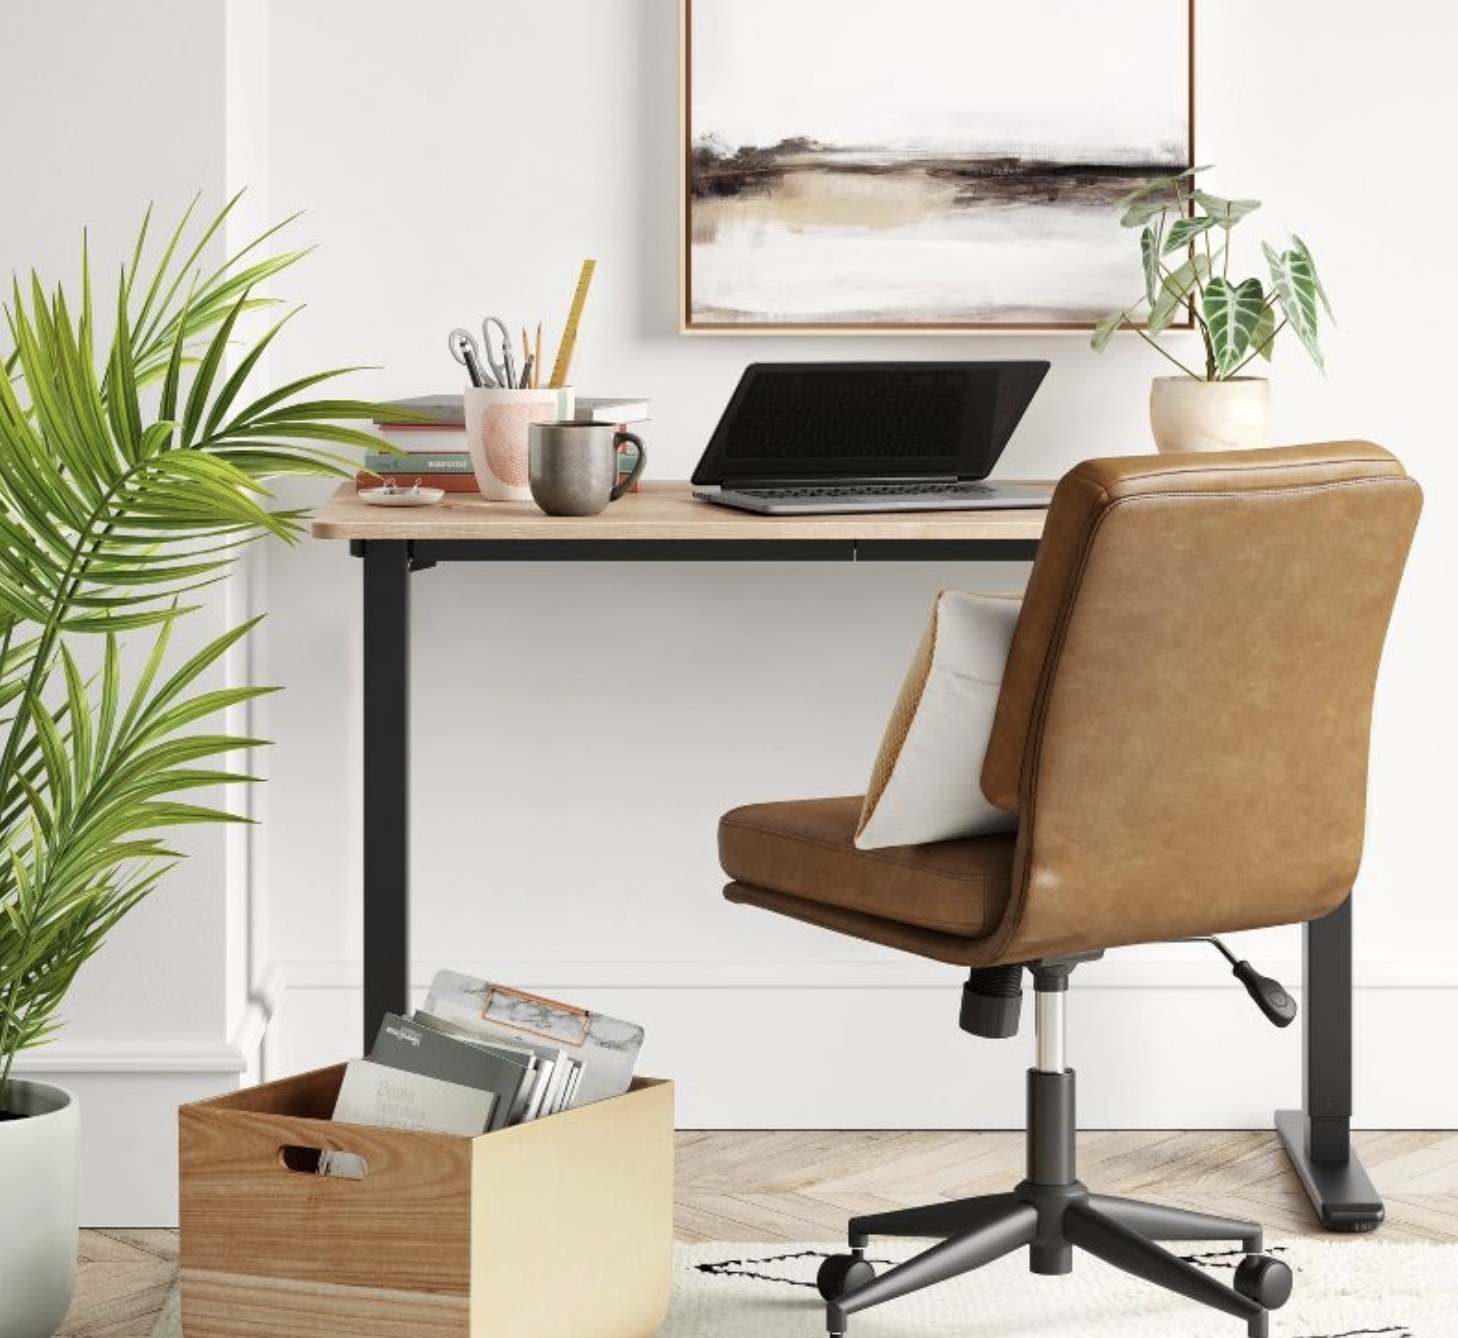 A desk and chair next to a plant